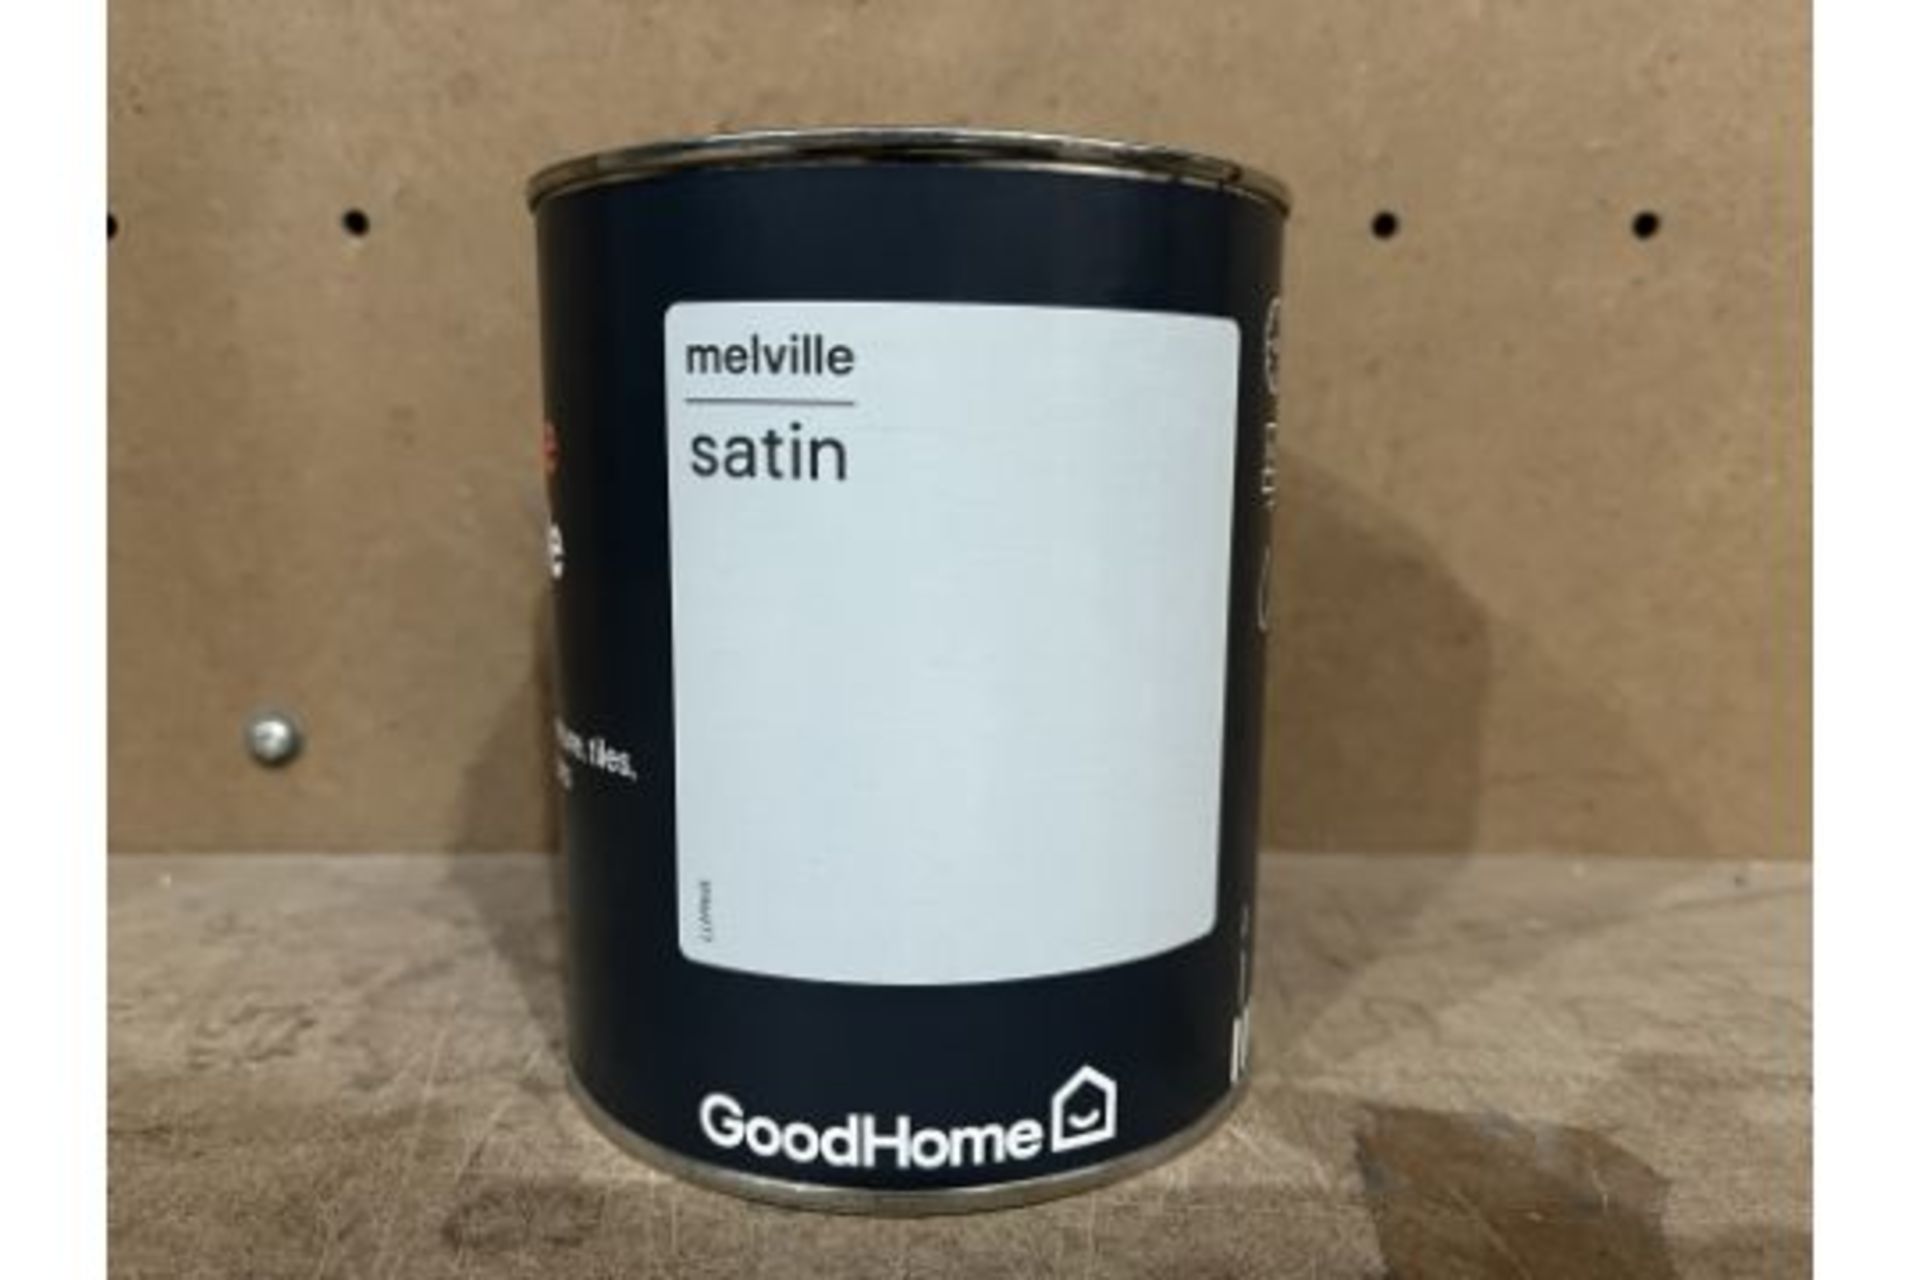 10 X BRAND NEW GOODHOME DURABLE MELVILLE SATIN MULTI SURFACE PAINT 750ML RRP £22 EACH PCK